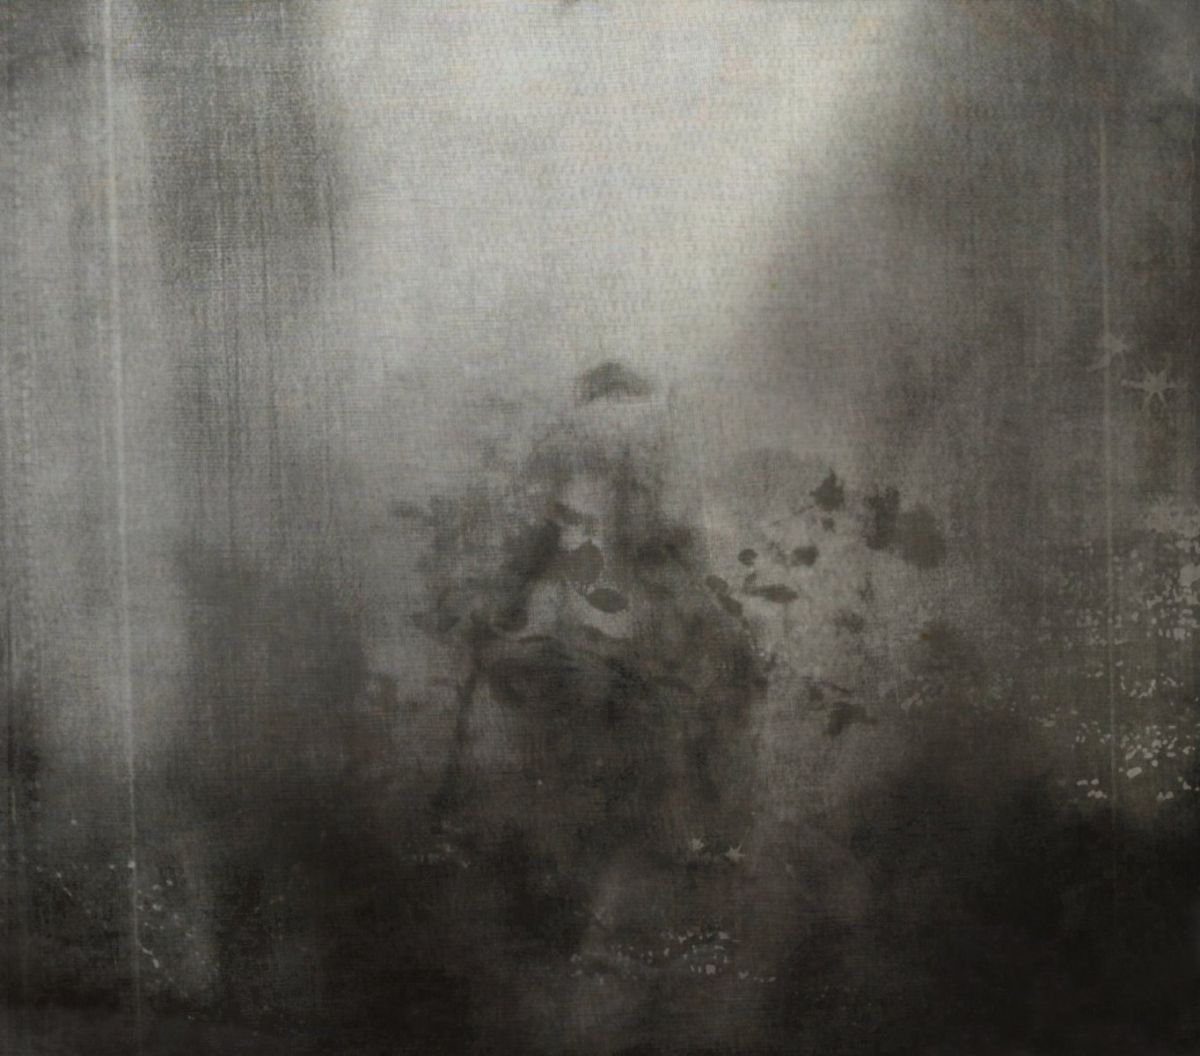 Alone... by Philippe berthier